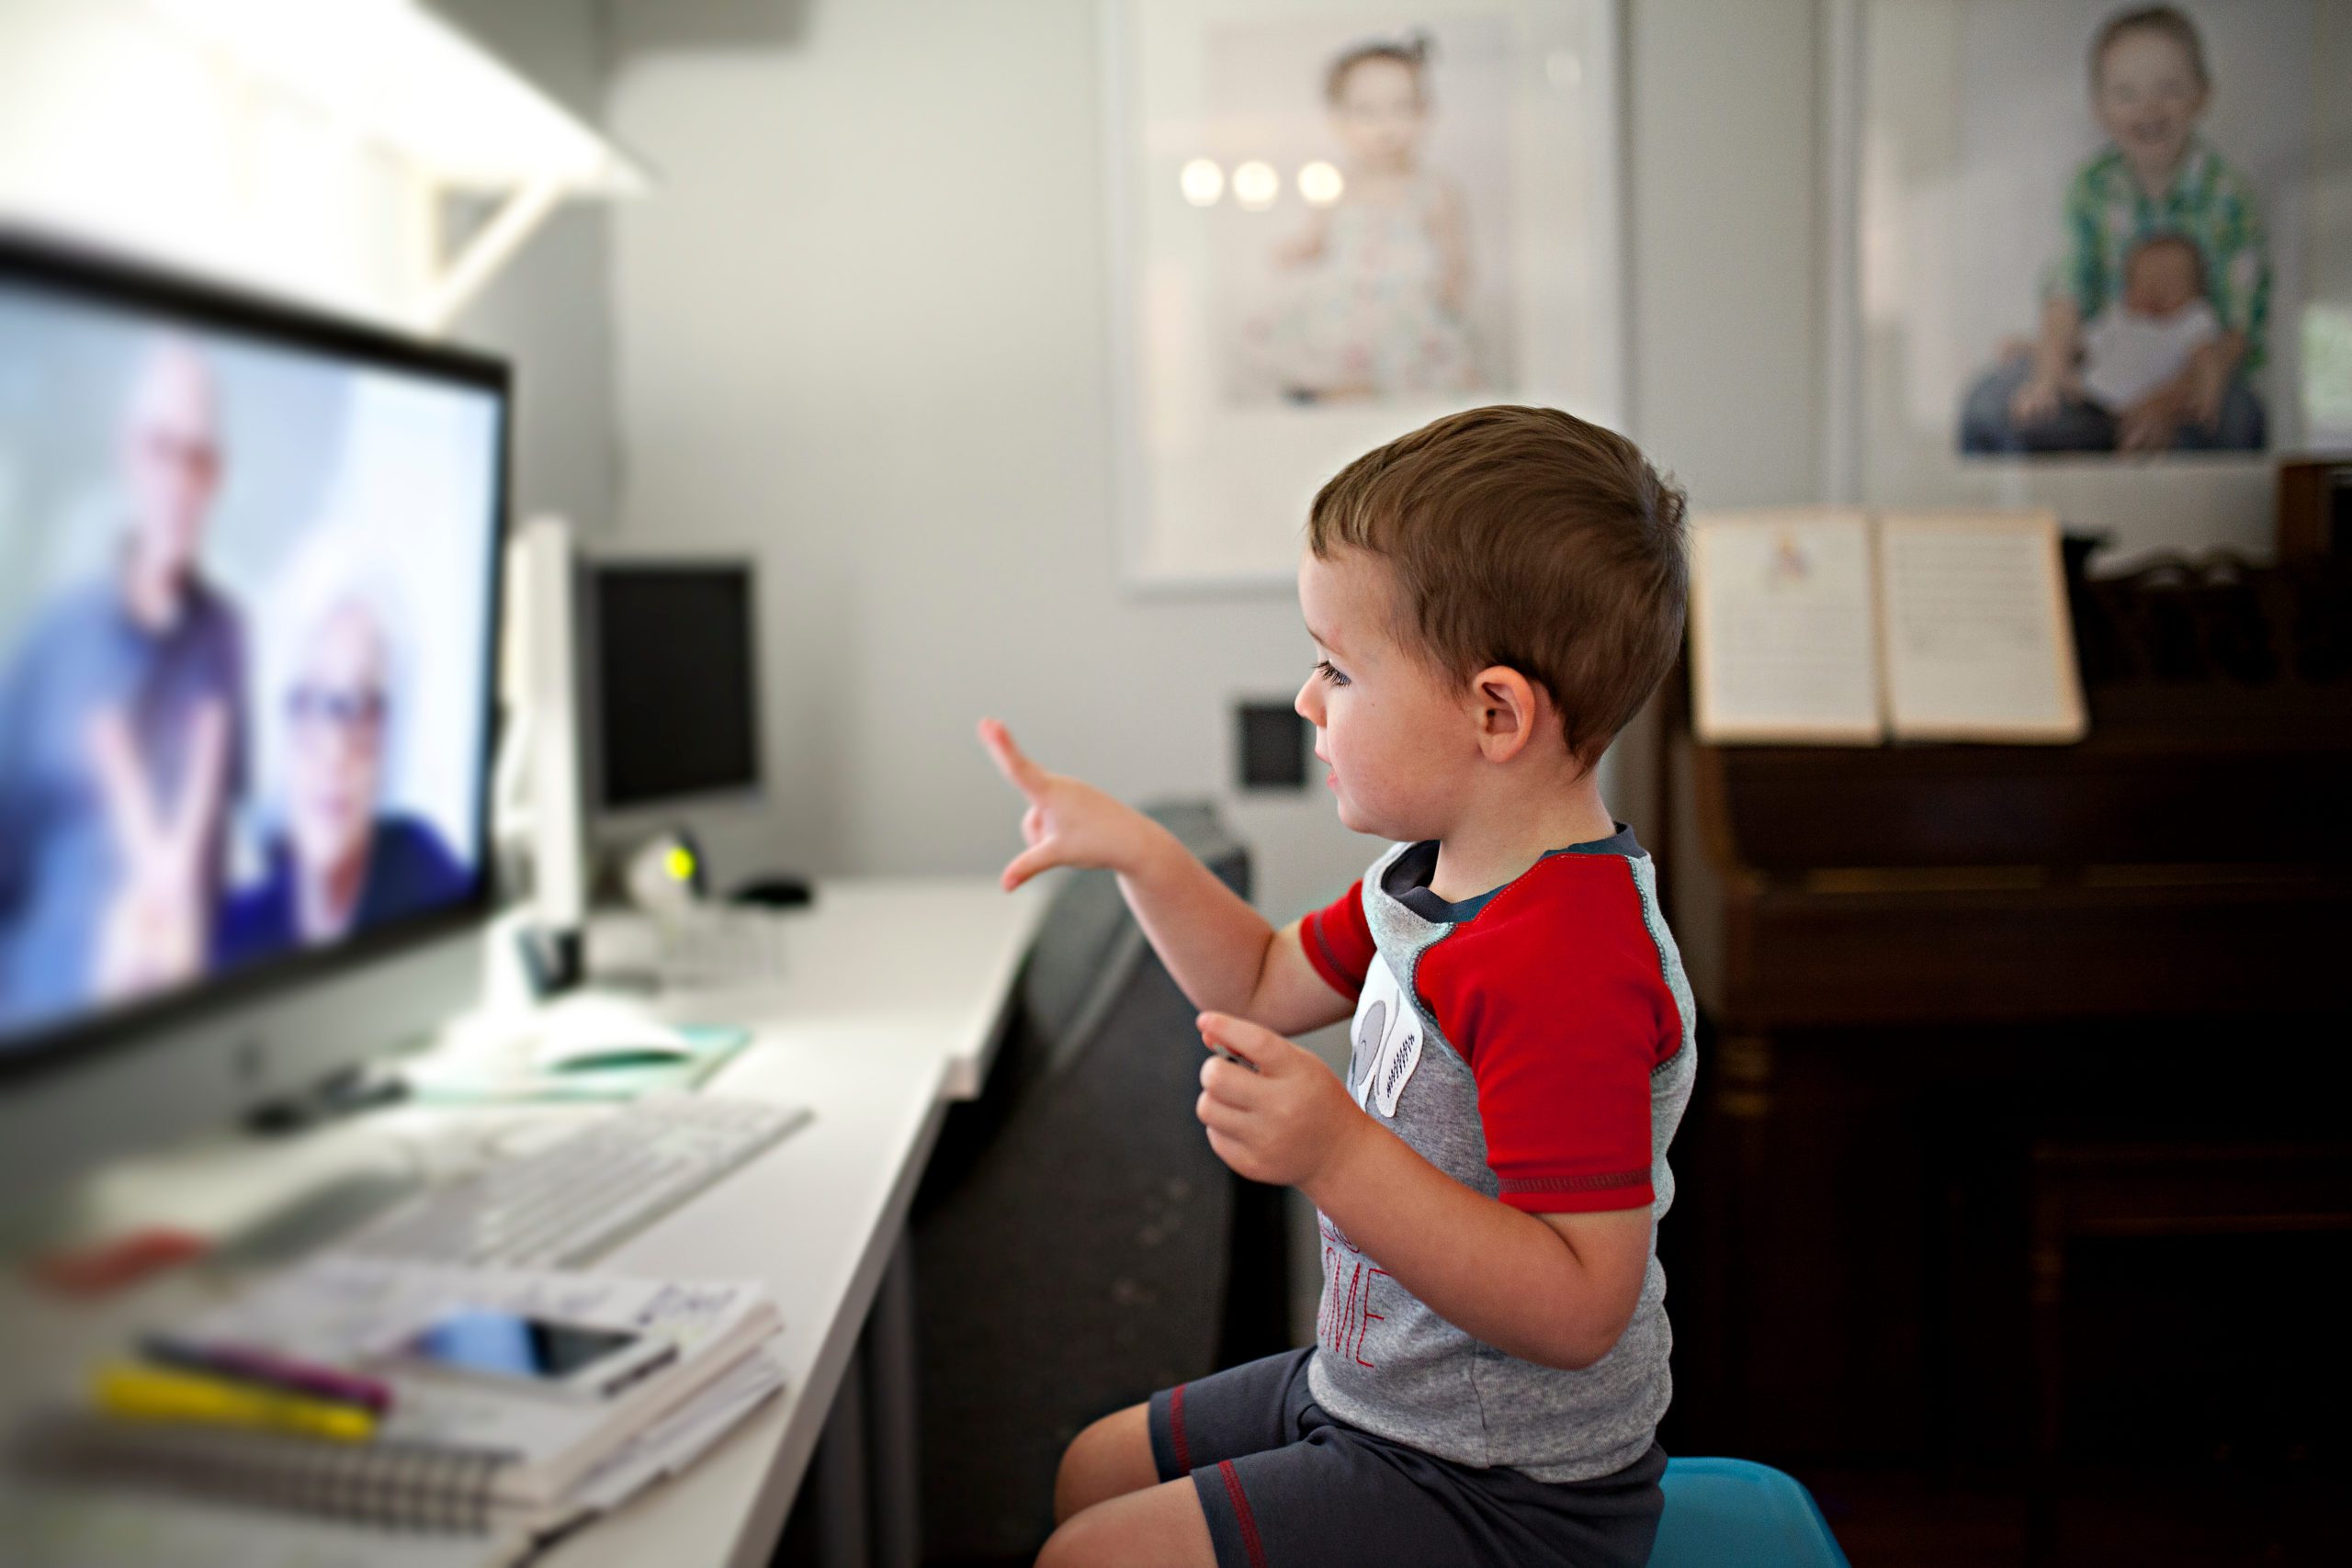 Young boy in a red and white shirt pointing to a computer screen on which his grandparents are featured